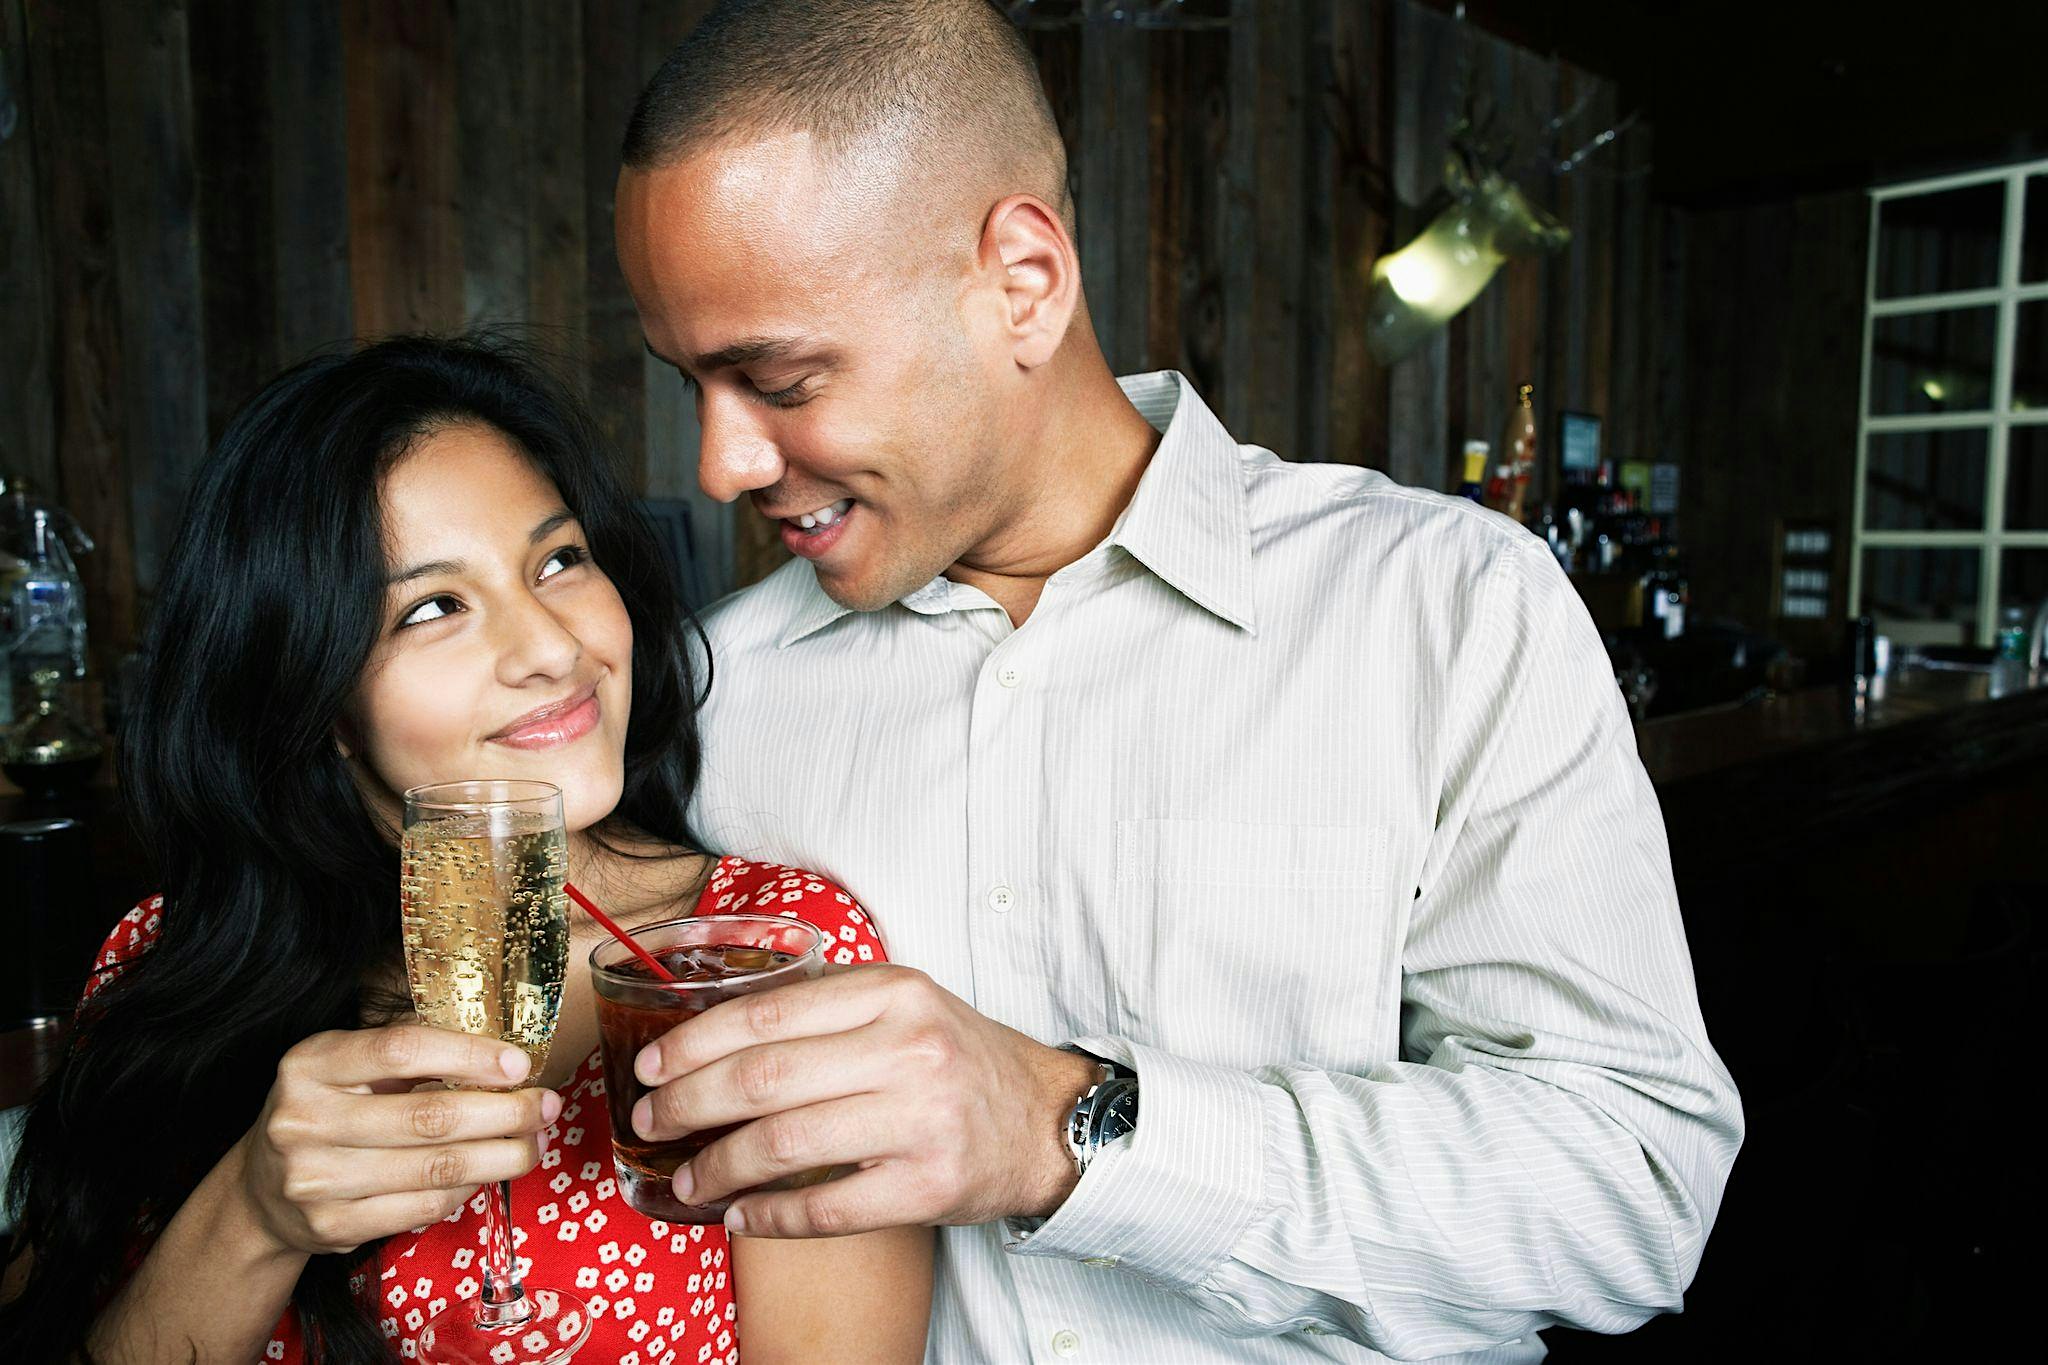 Speed Dating for Men & Women in their 30s and 40s (NYC) I Meet Your Match